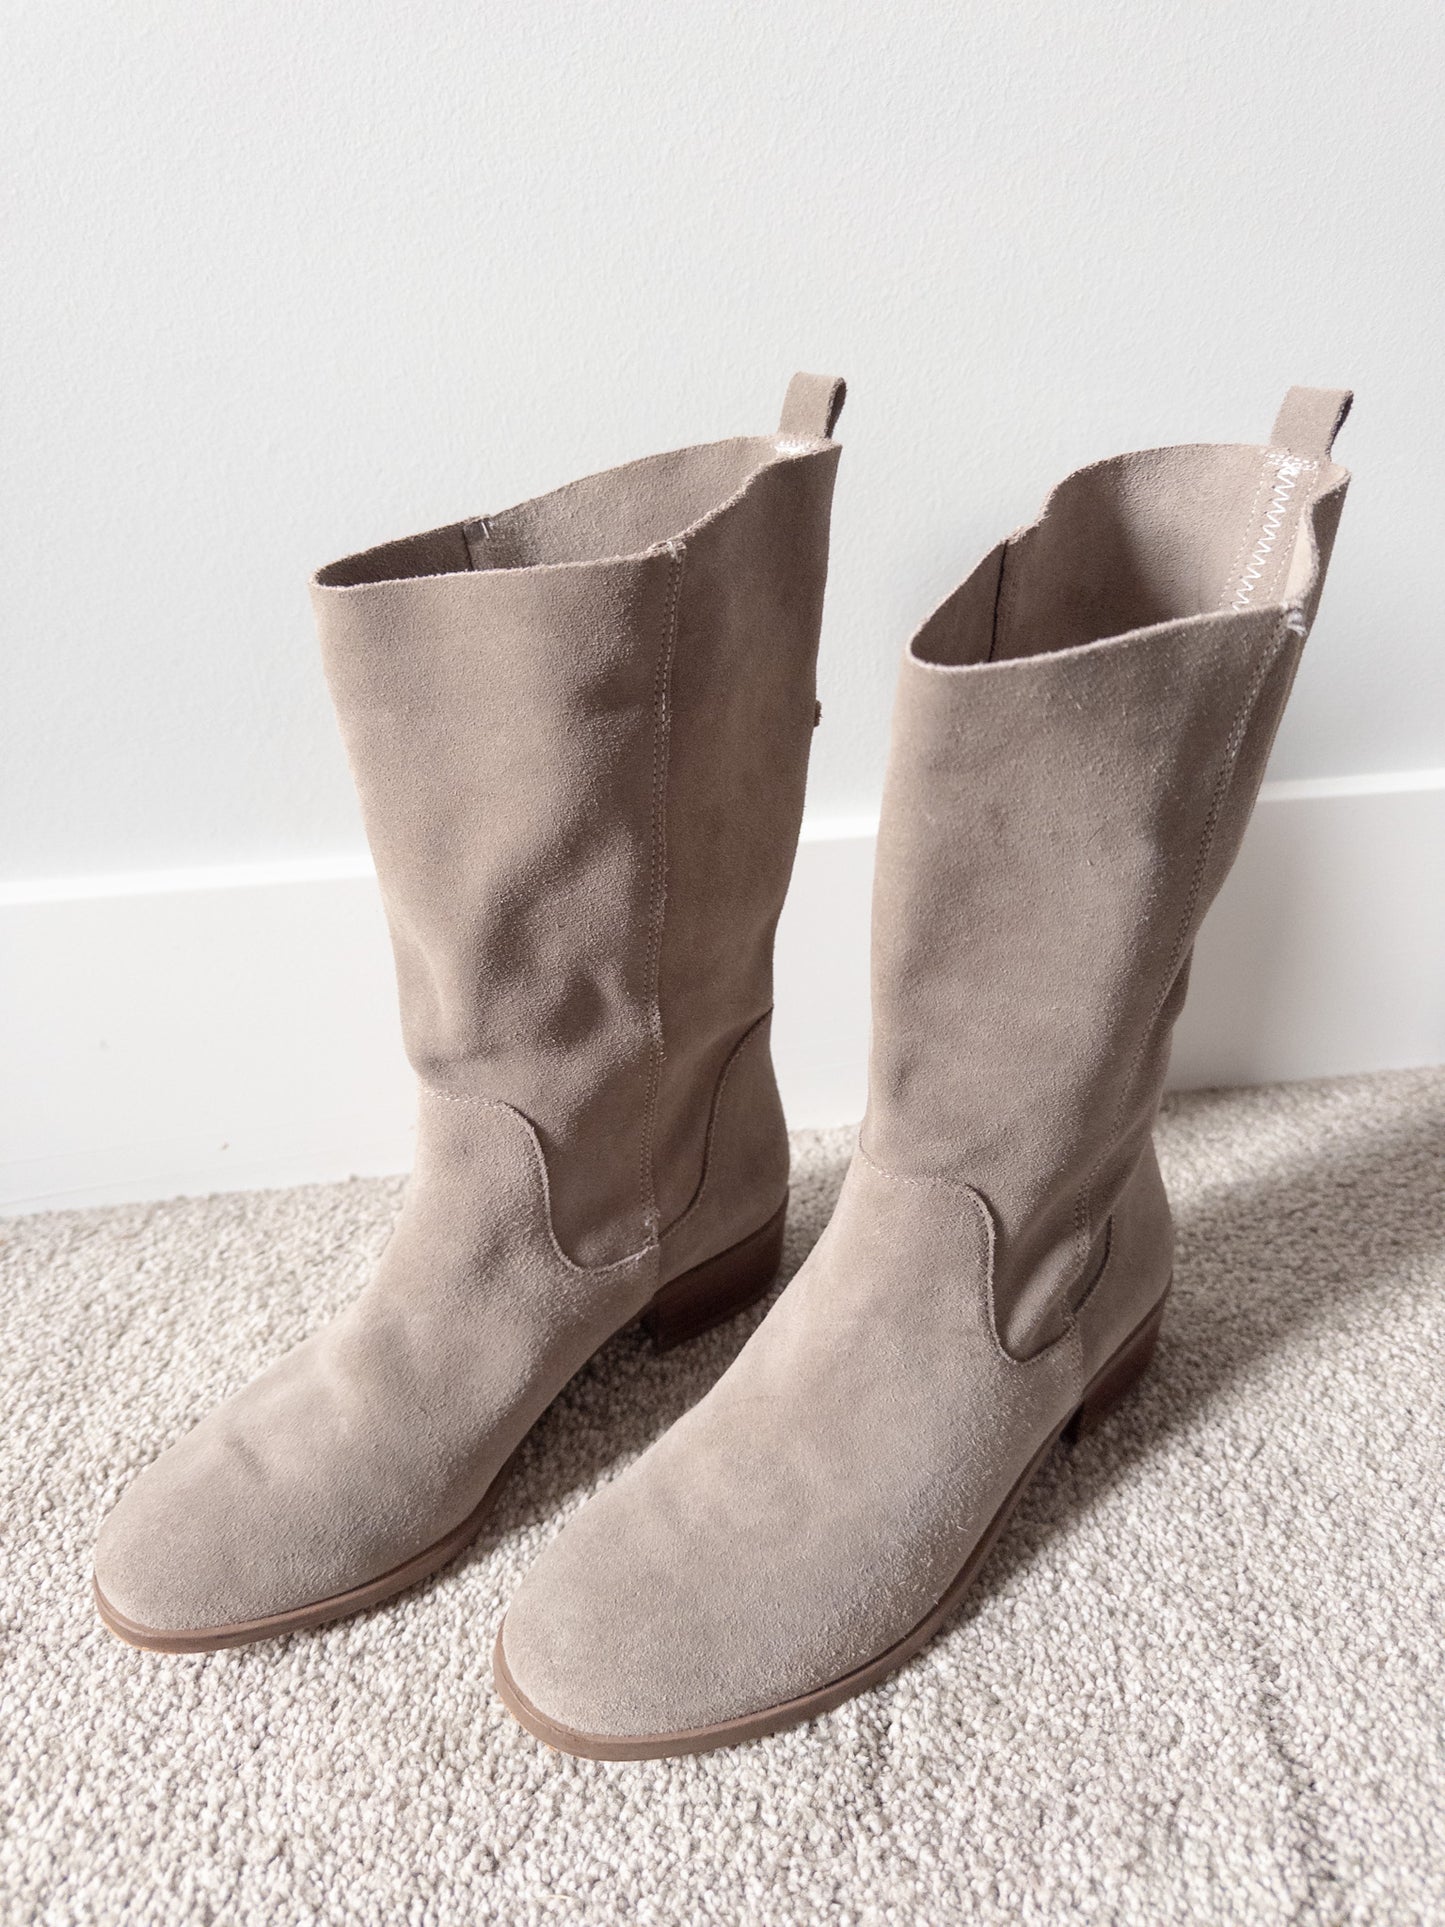 Sole Society 6.5 Gray Suede Boots - Like New